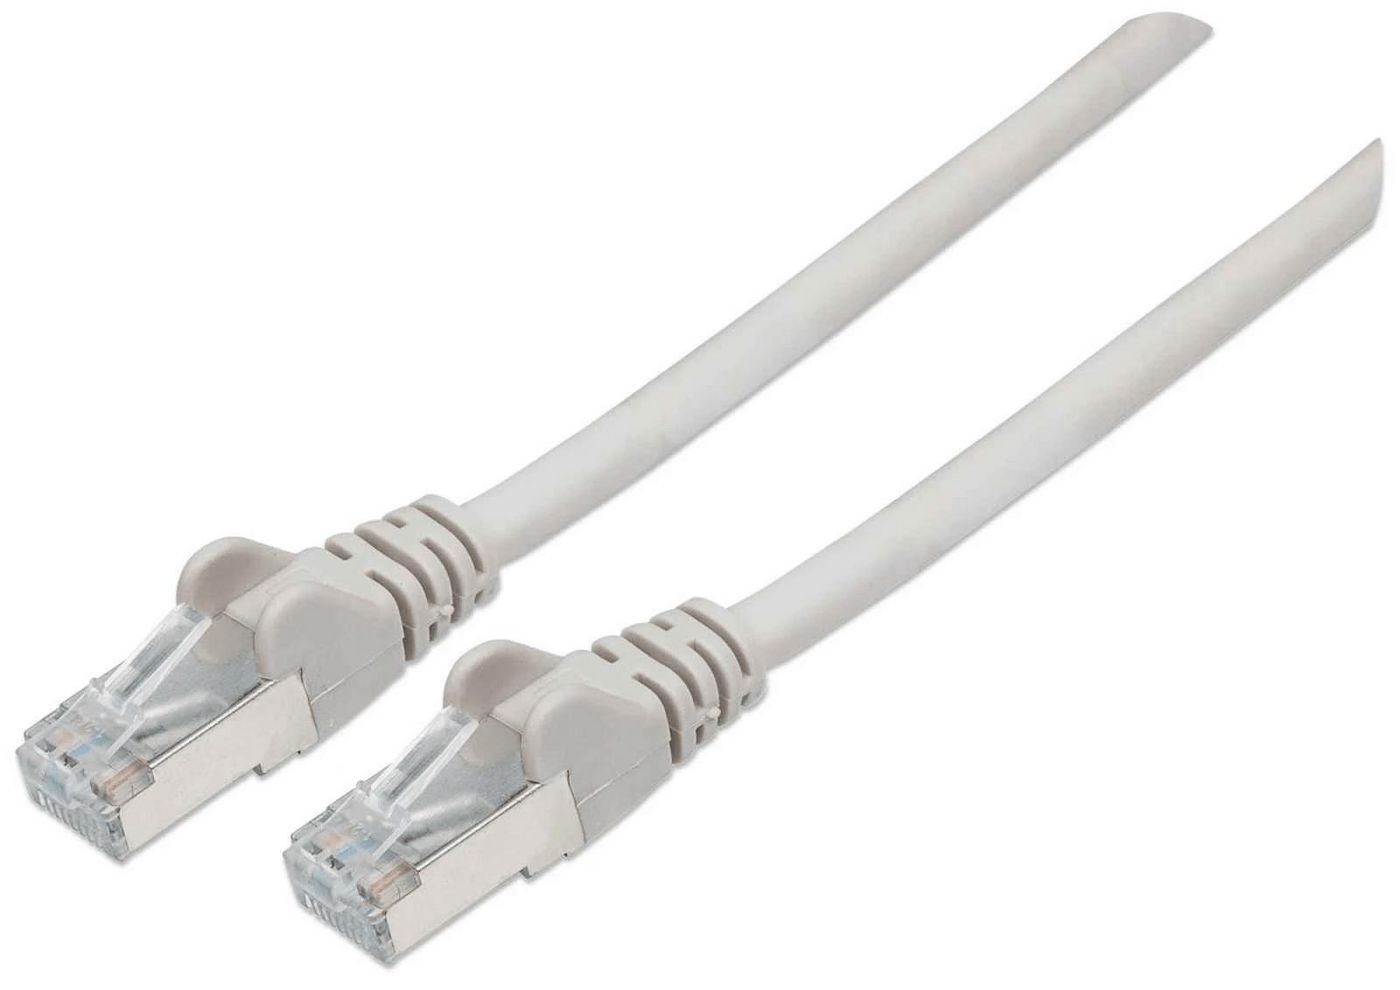 Intellinet 740616 High Performance Network Cable 